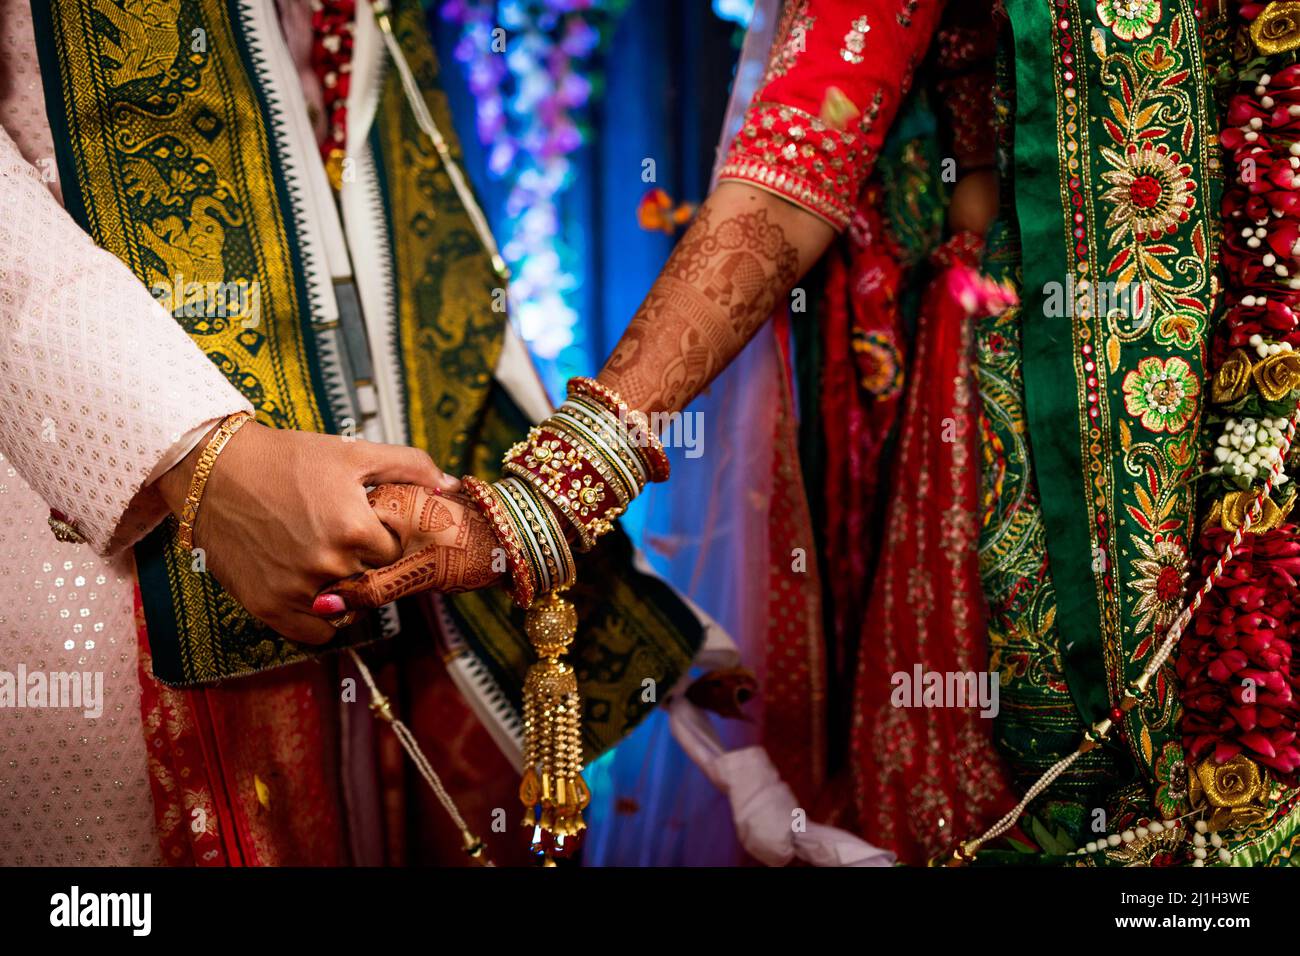 A closeup shot of an Indian couple with hands holding each other in traditional dresses Stock Photo